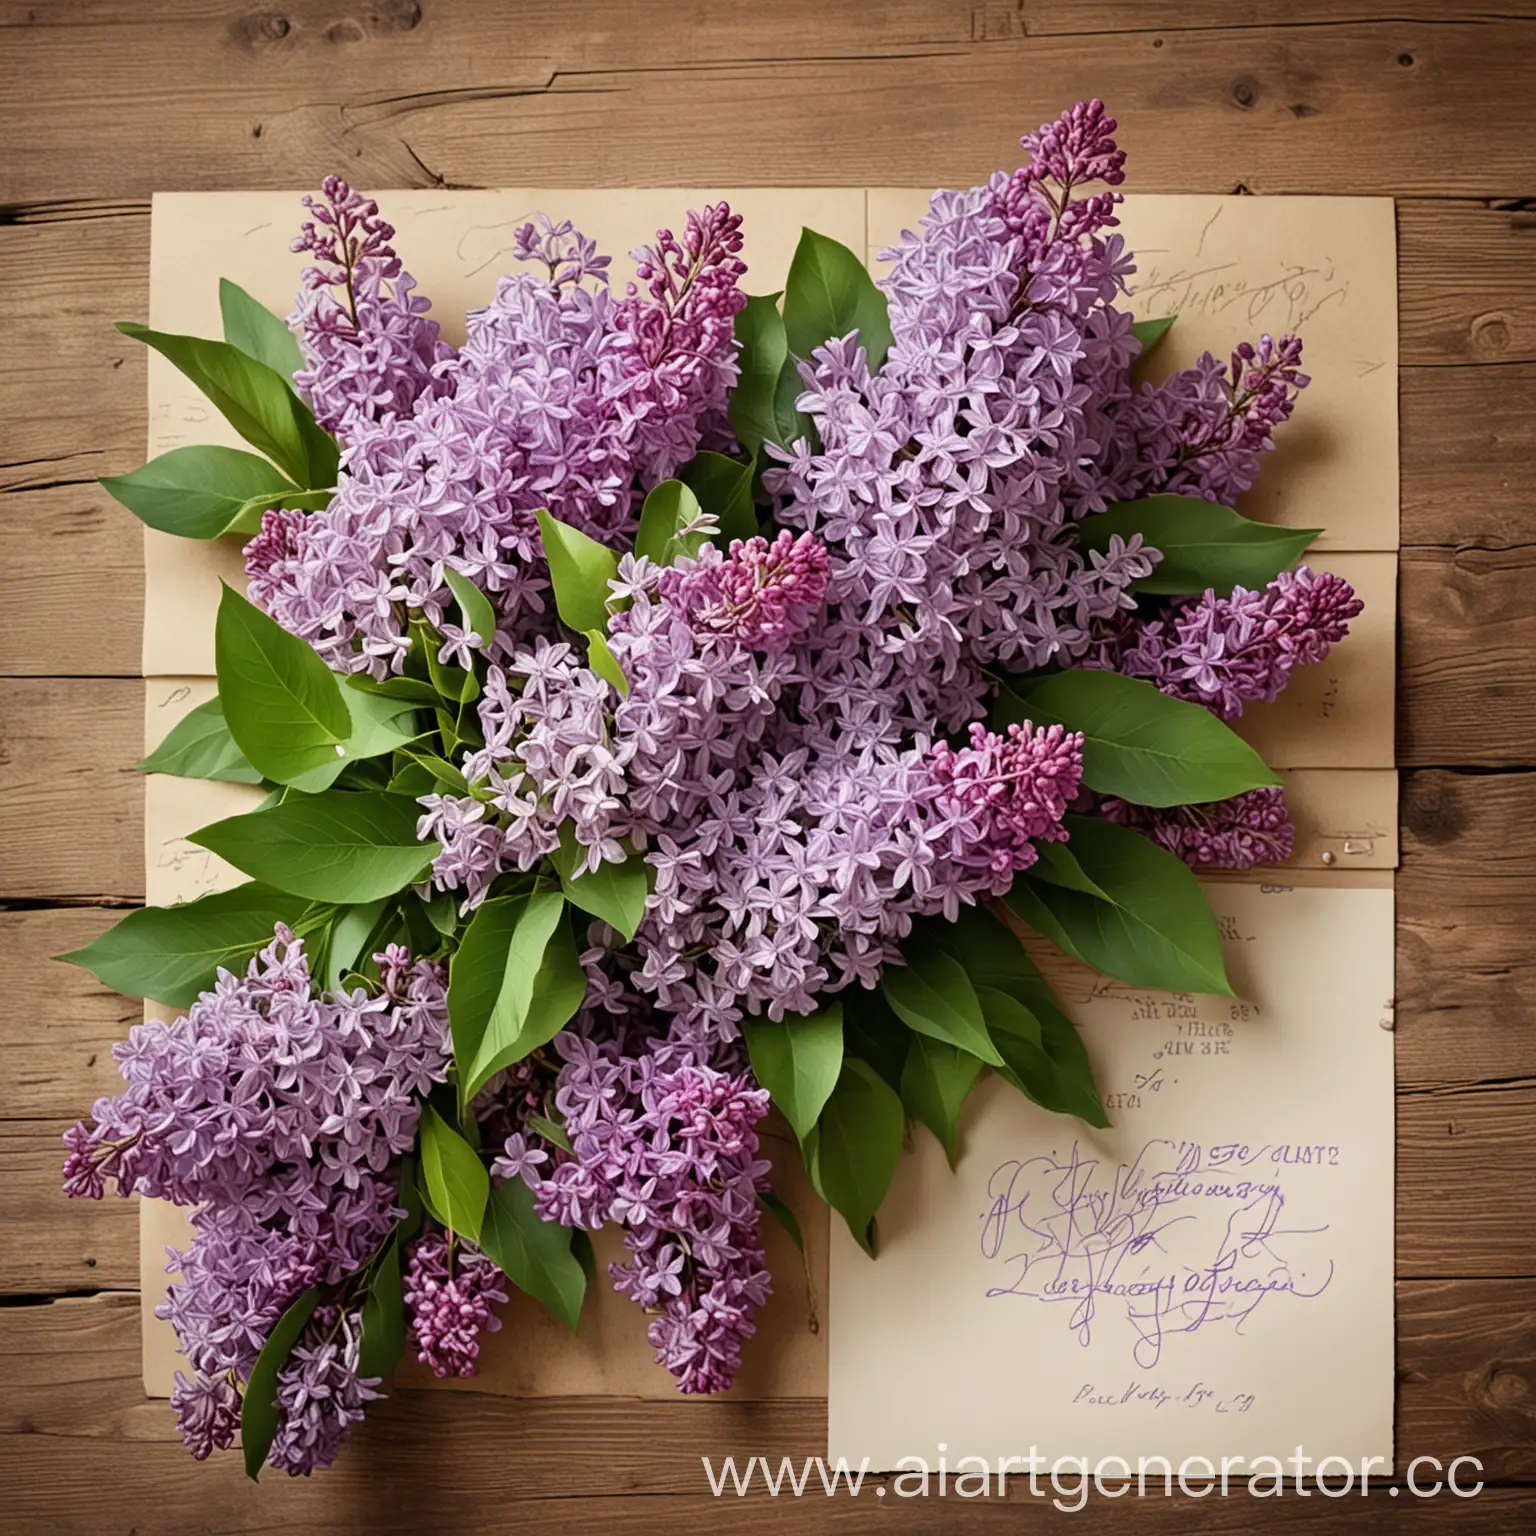 postcard with a bouquet of lilacs and a congratulatory inscription for Victory Day on May 9